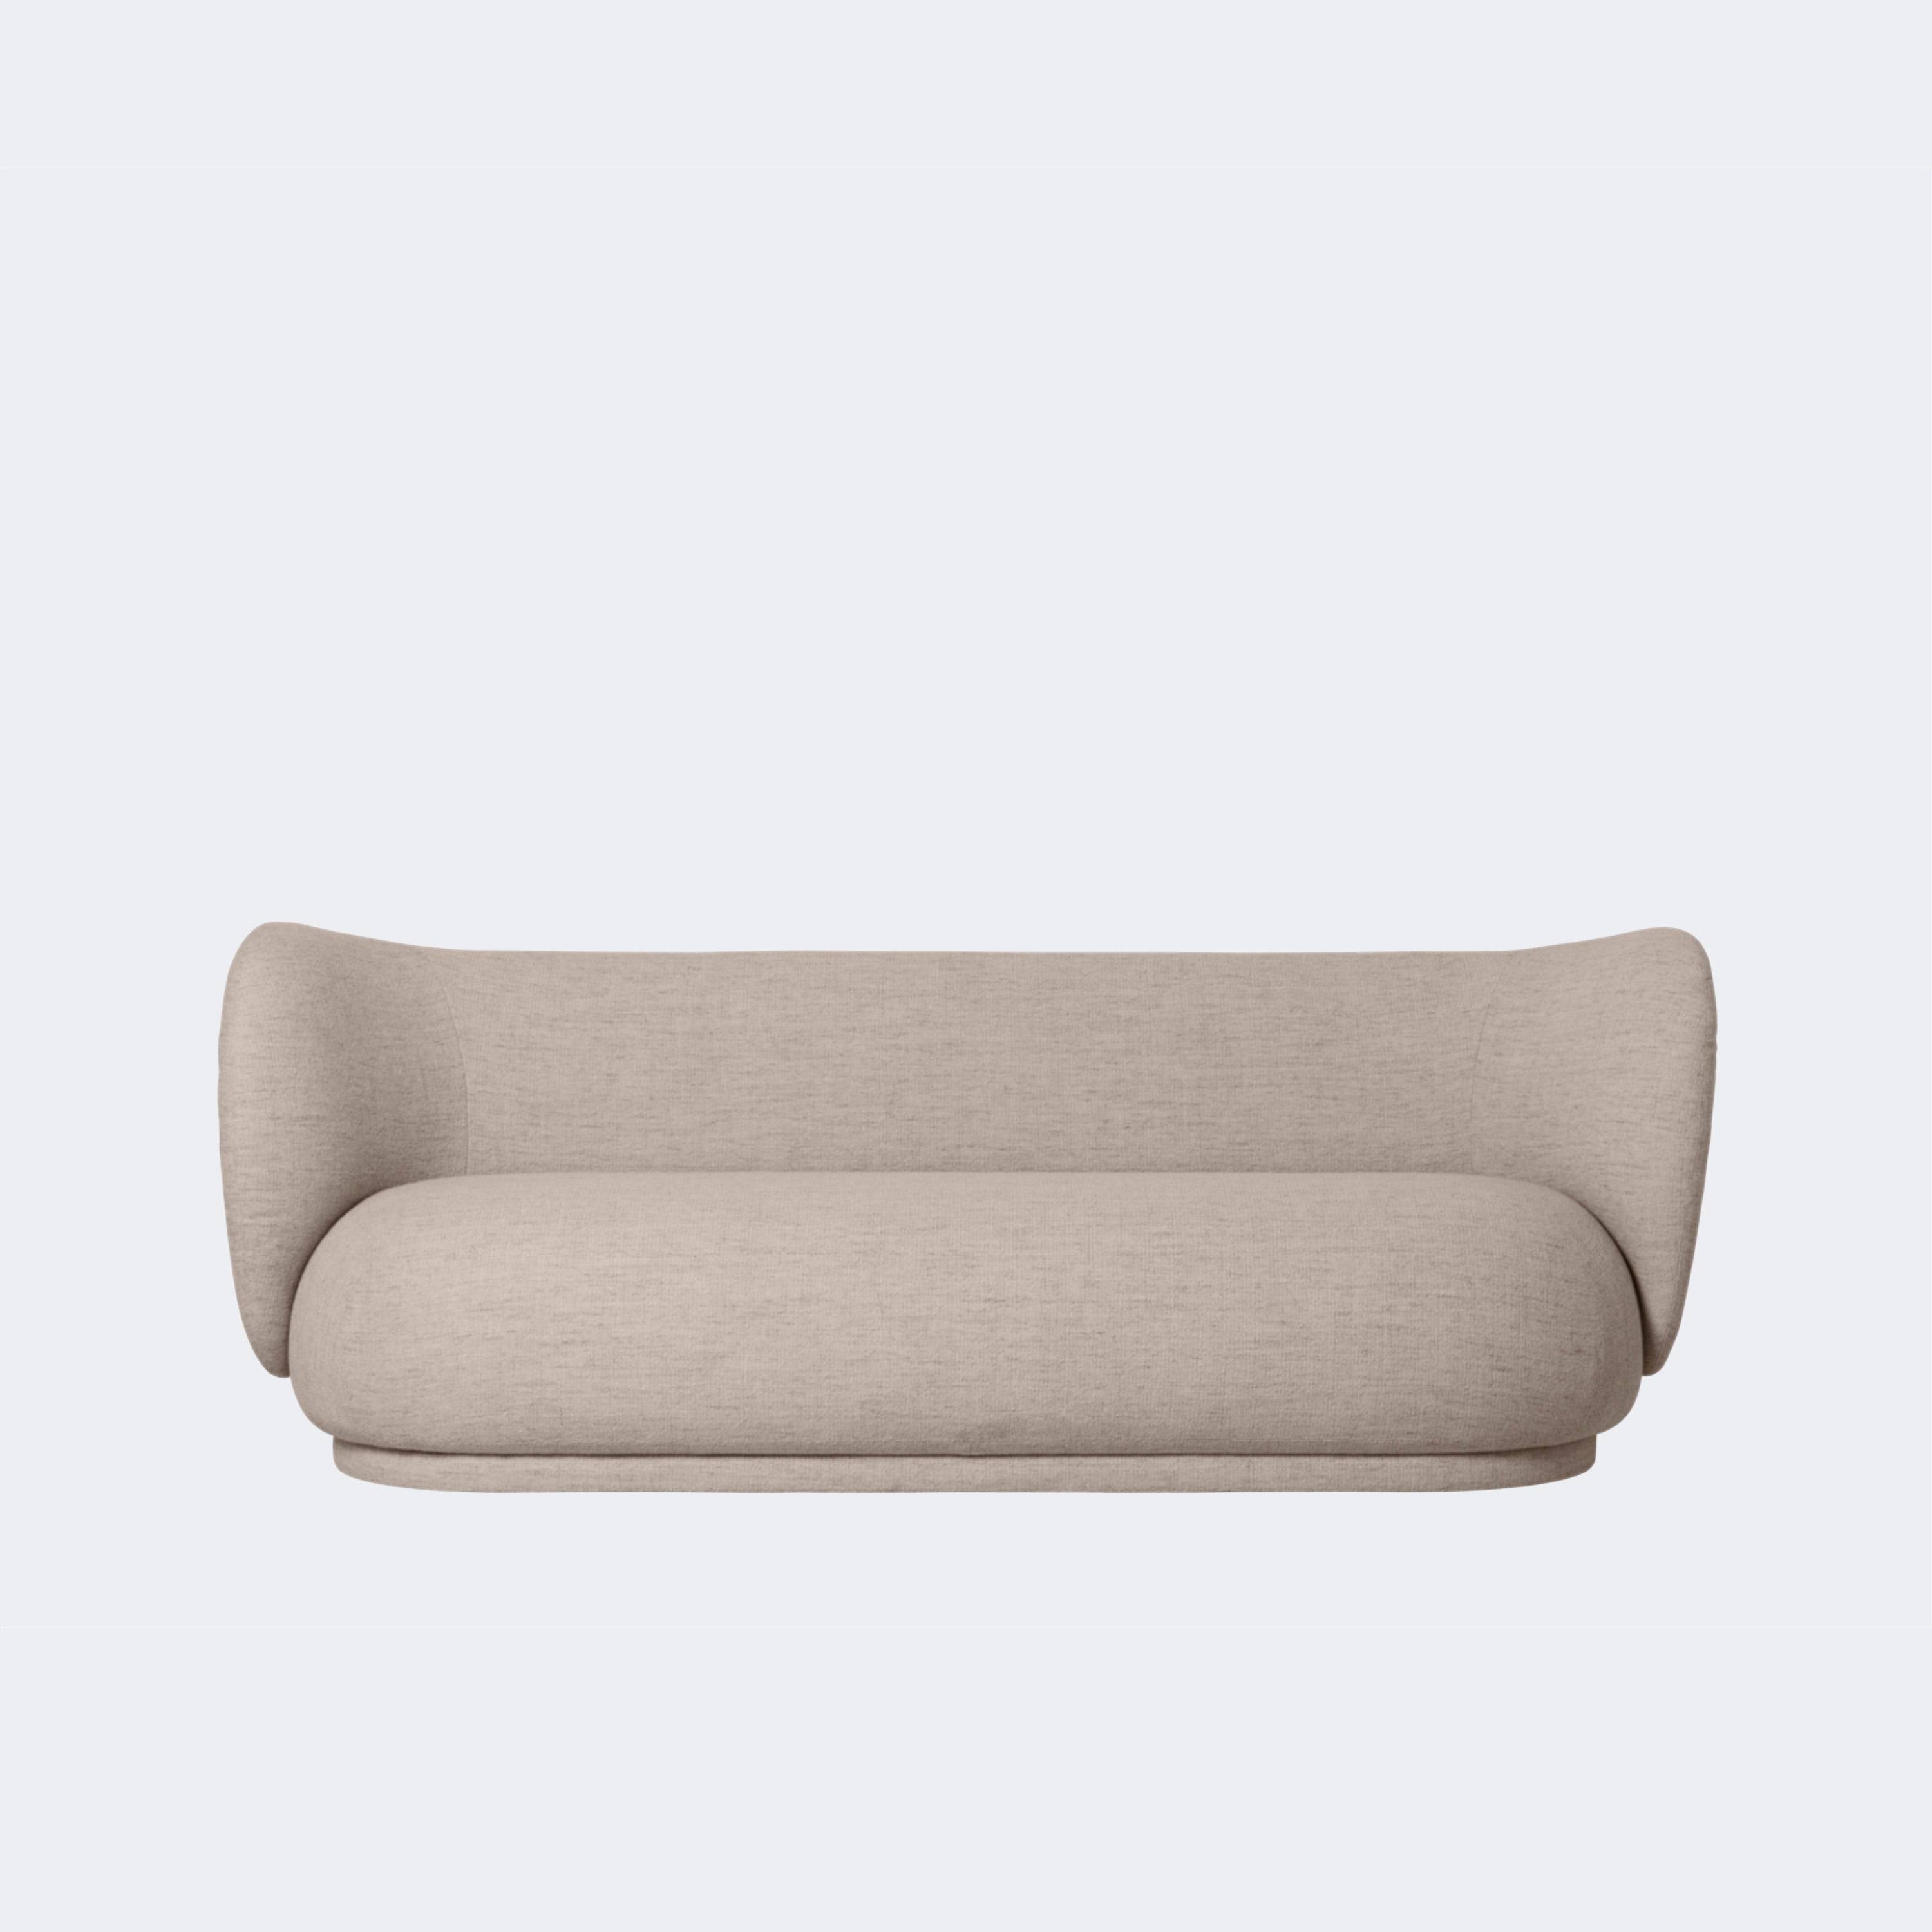 Ferm Living Rico Sofa, 3 Seater Ready To Ship Boucle - Sand - KANSO#Fabric_Boucle - Sand